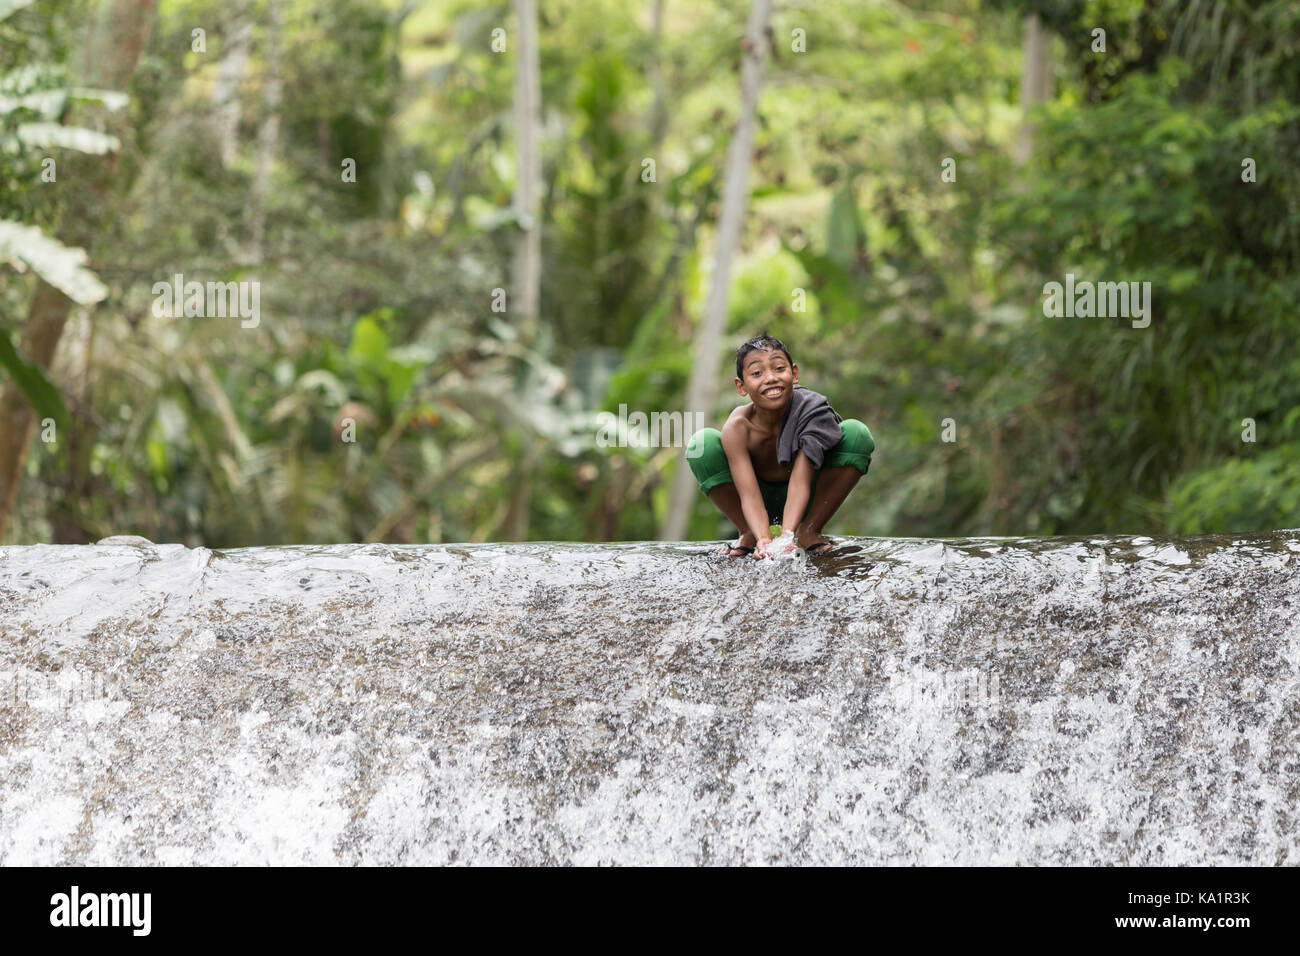 Children from small village under Mount Agung playing in watterfall Stock Photo